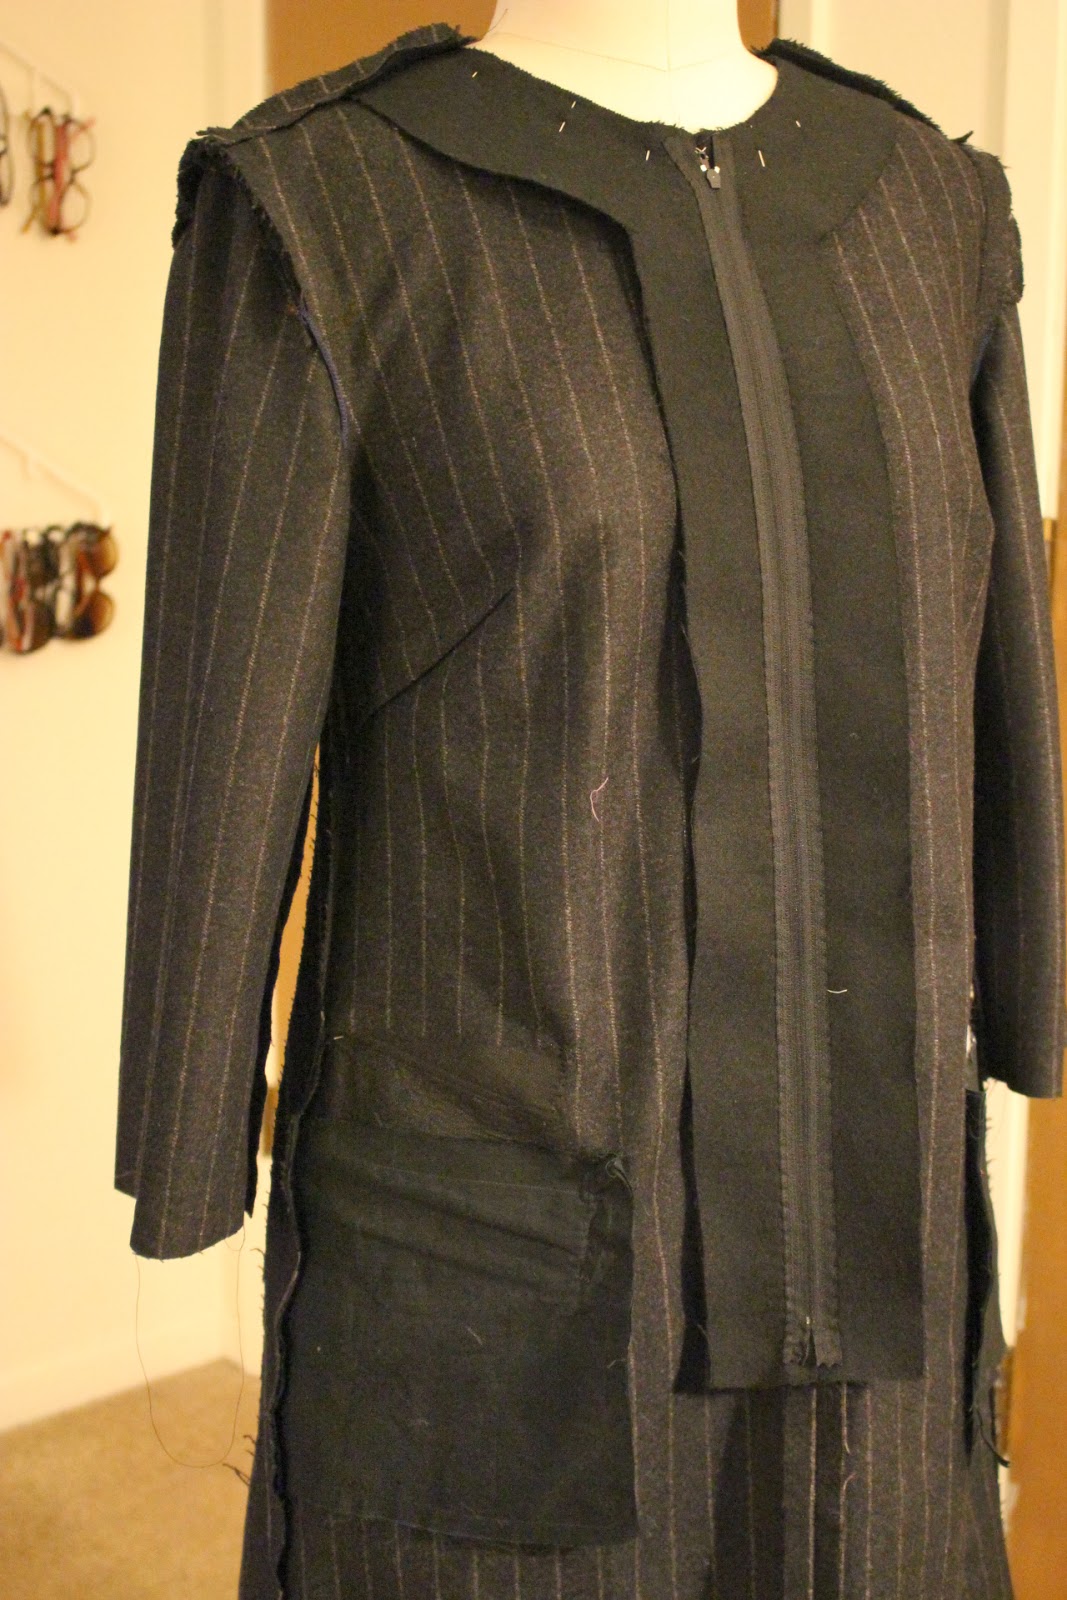 Sew Melodic : Progress Update on the Challenging Coat Dress